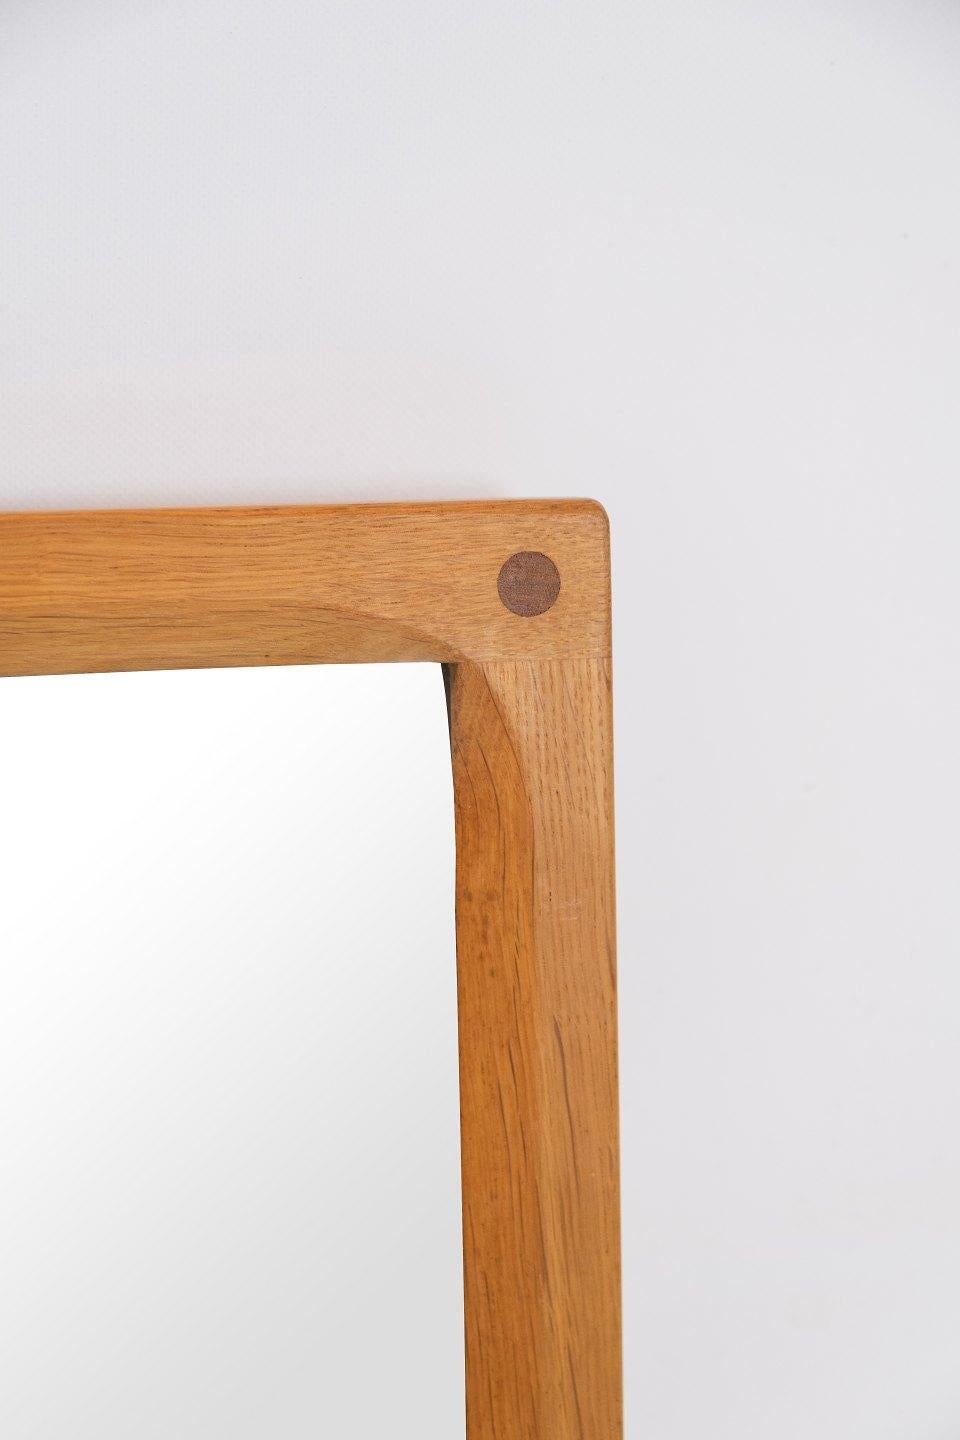 Mirror in oak of Danish design from Illum in the 1960s. The mirror is in great vintage condition.